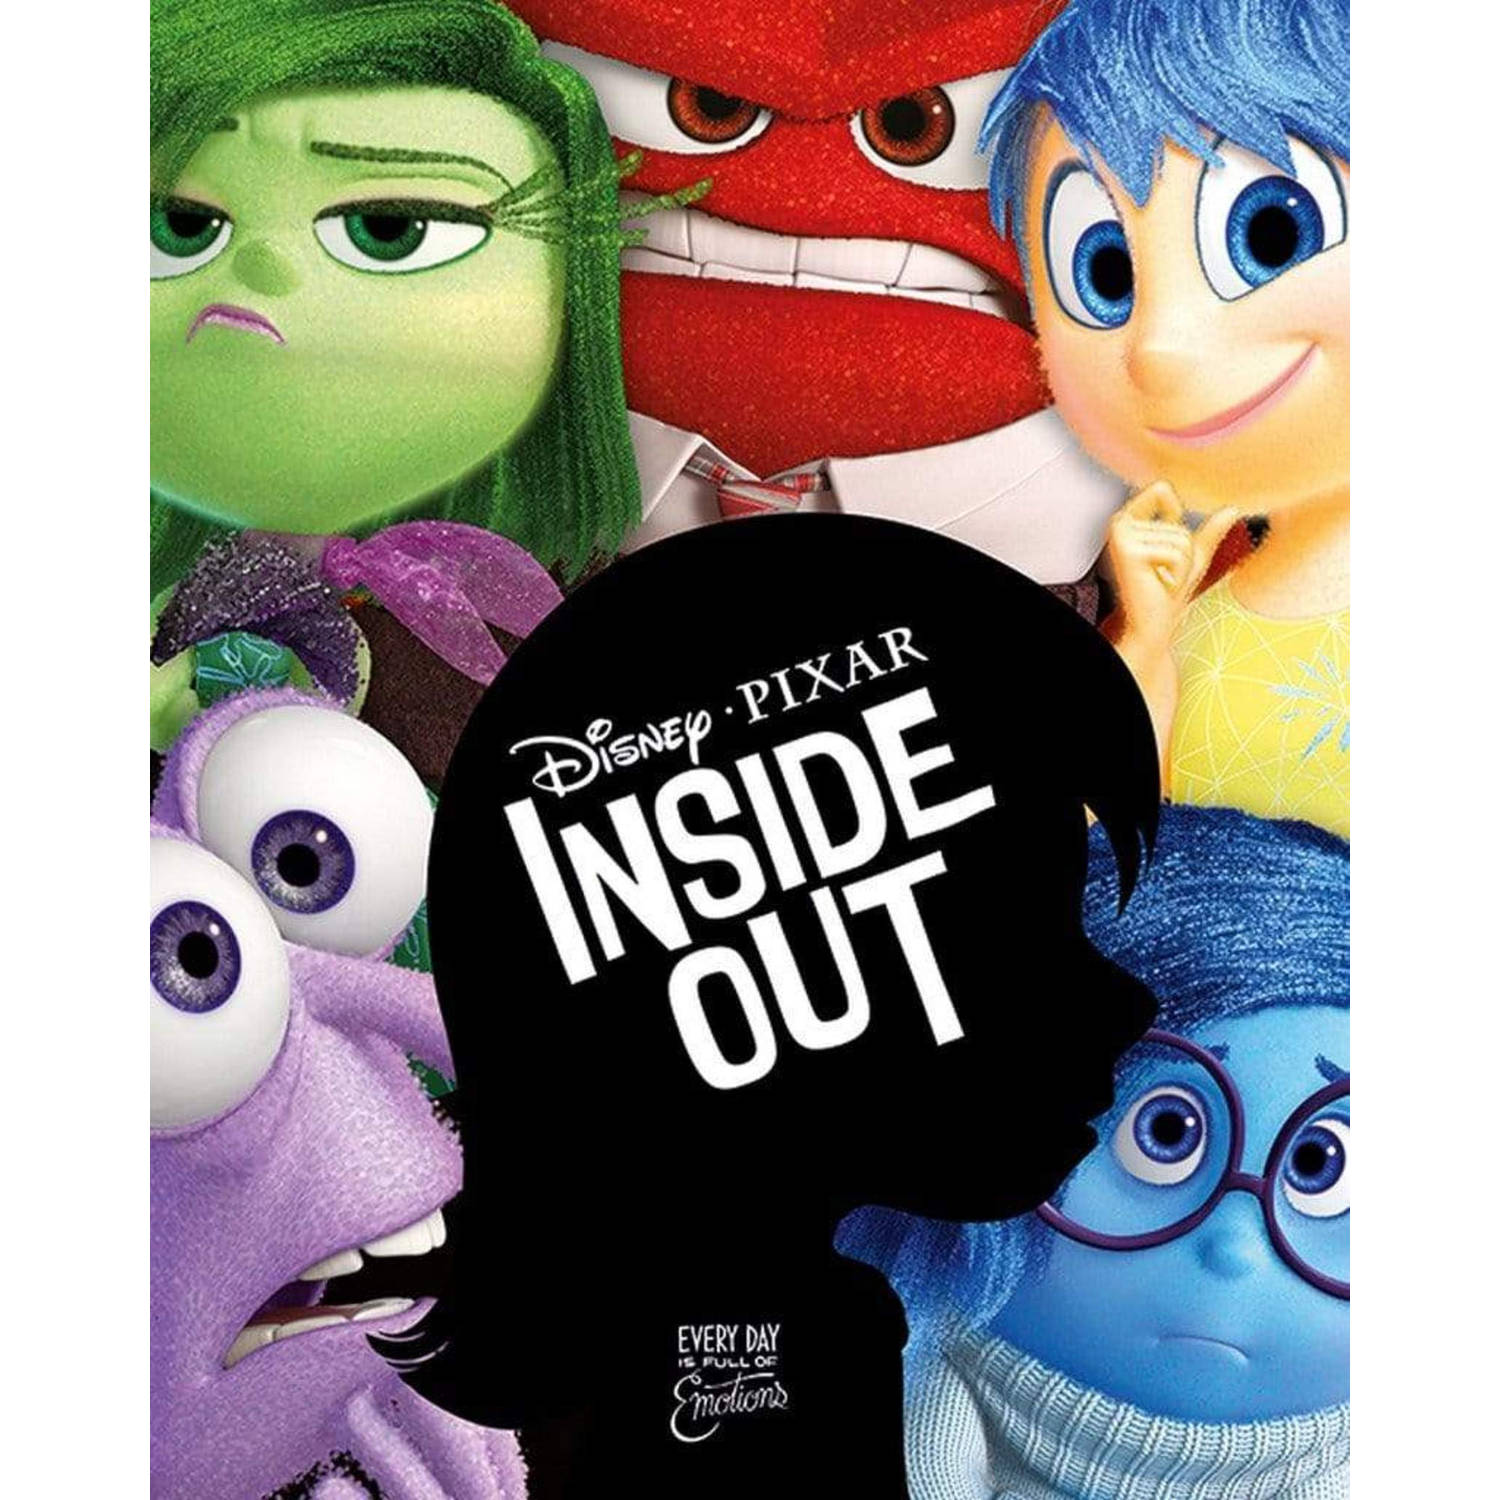 Disney Inside Out Silhouette 16 x 20 Inches Mini Poster